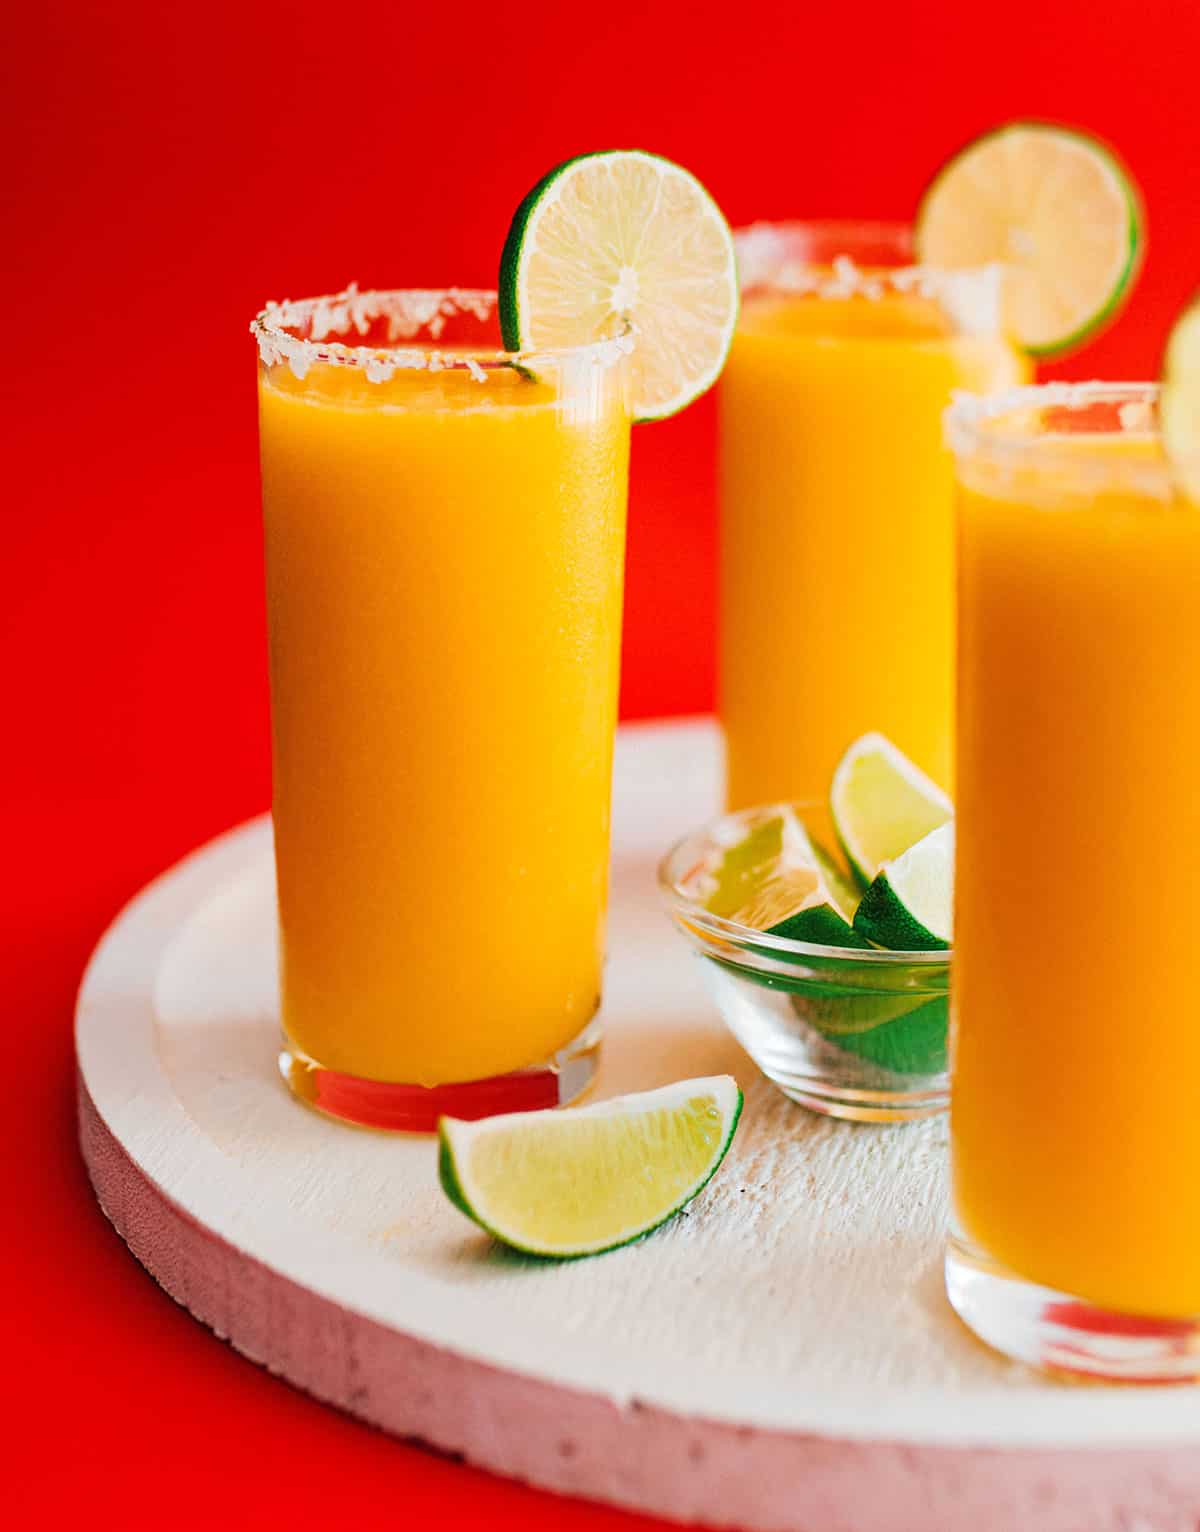 Frozen mango margarita slush in a glass with a slice of lime on a red background.